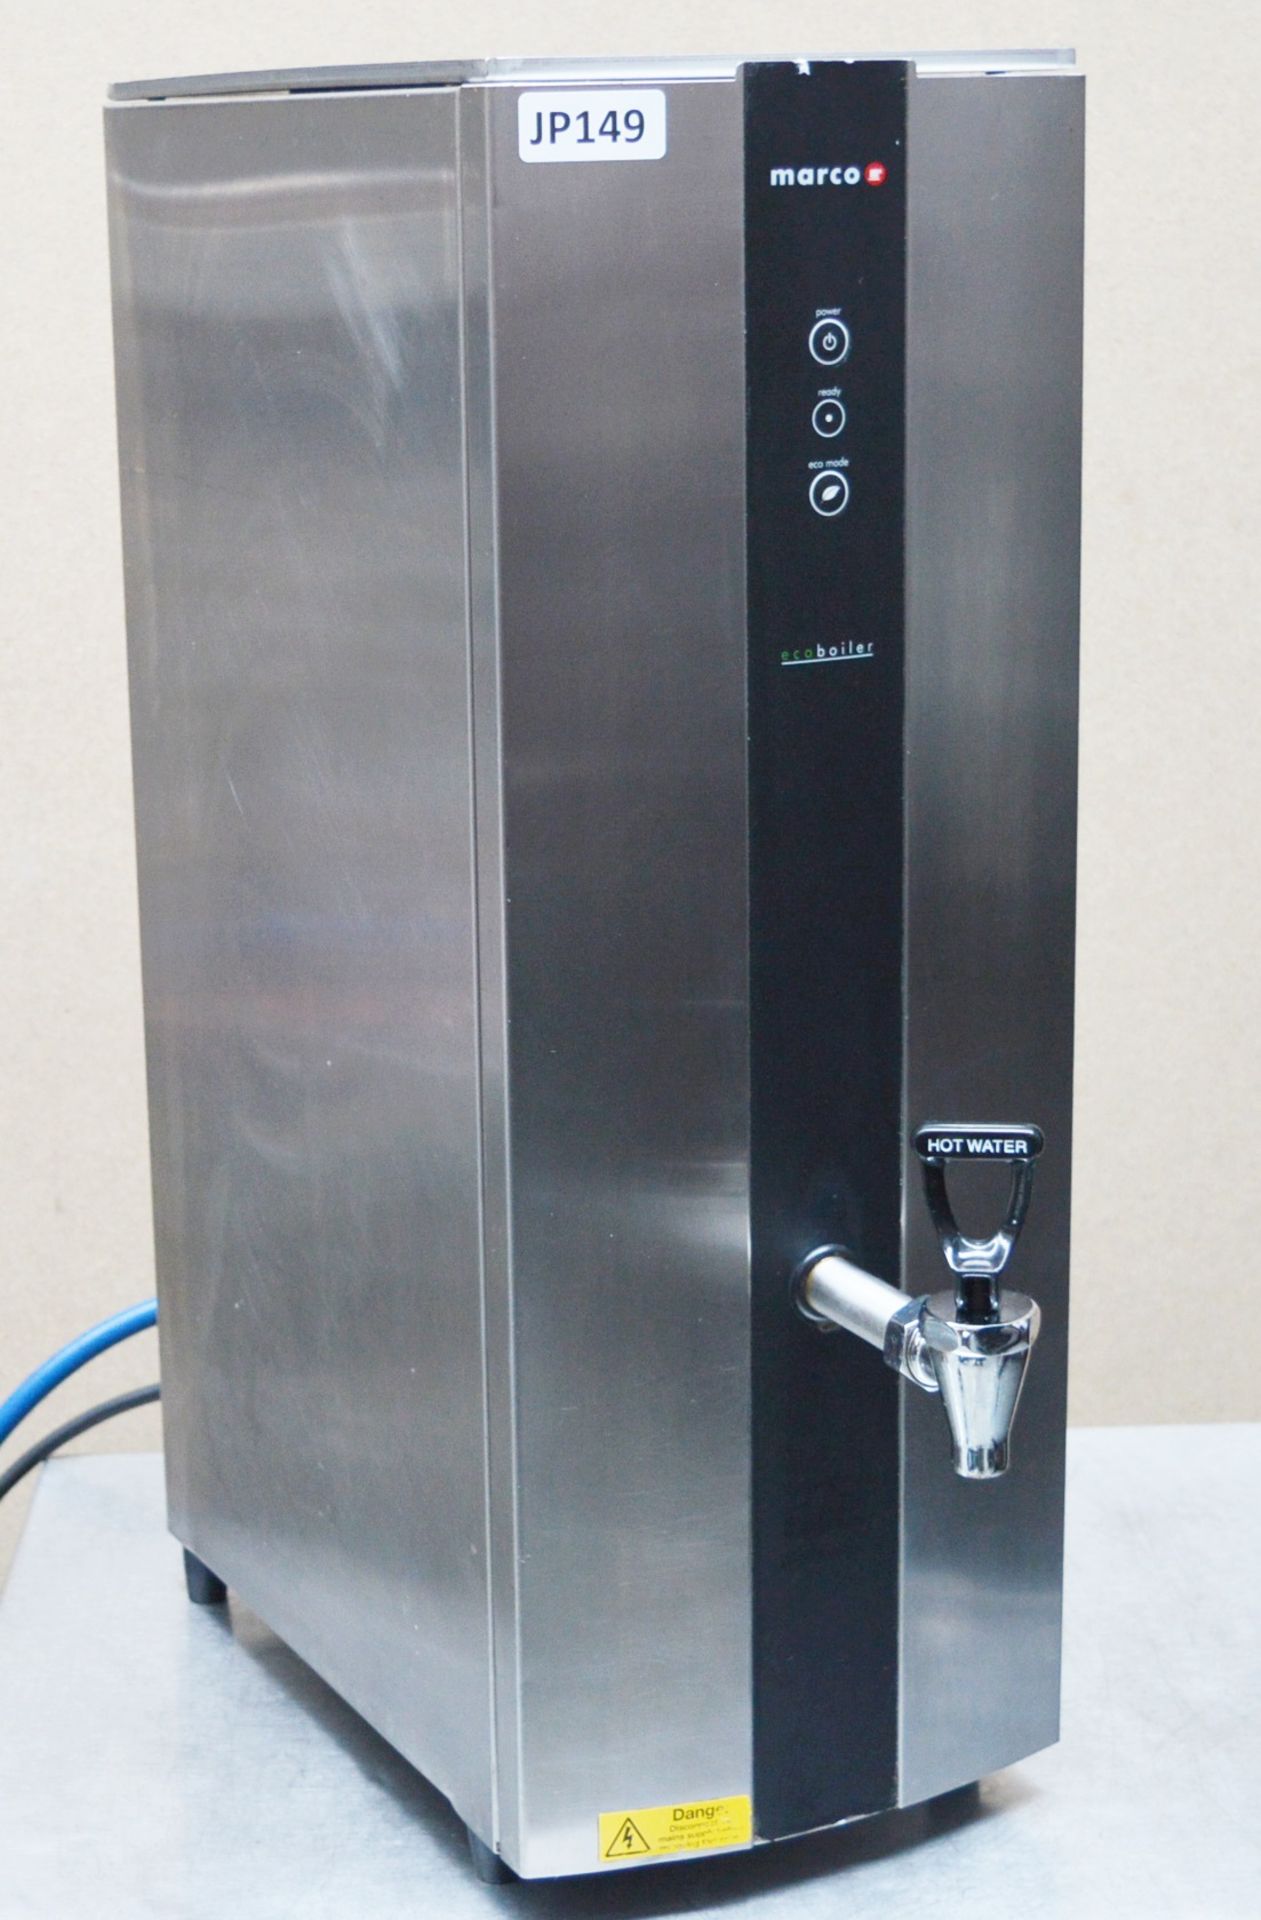 1 x Marco EcoBoiler T20 Counter Top Hot Water Dispenser - 2.8kW 20 Litre Capacity - CL232 - - Image 9 of 9